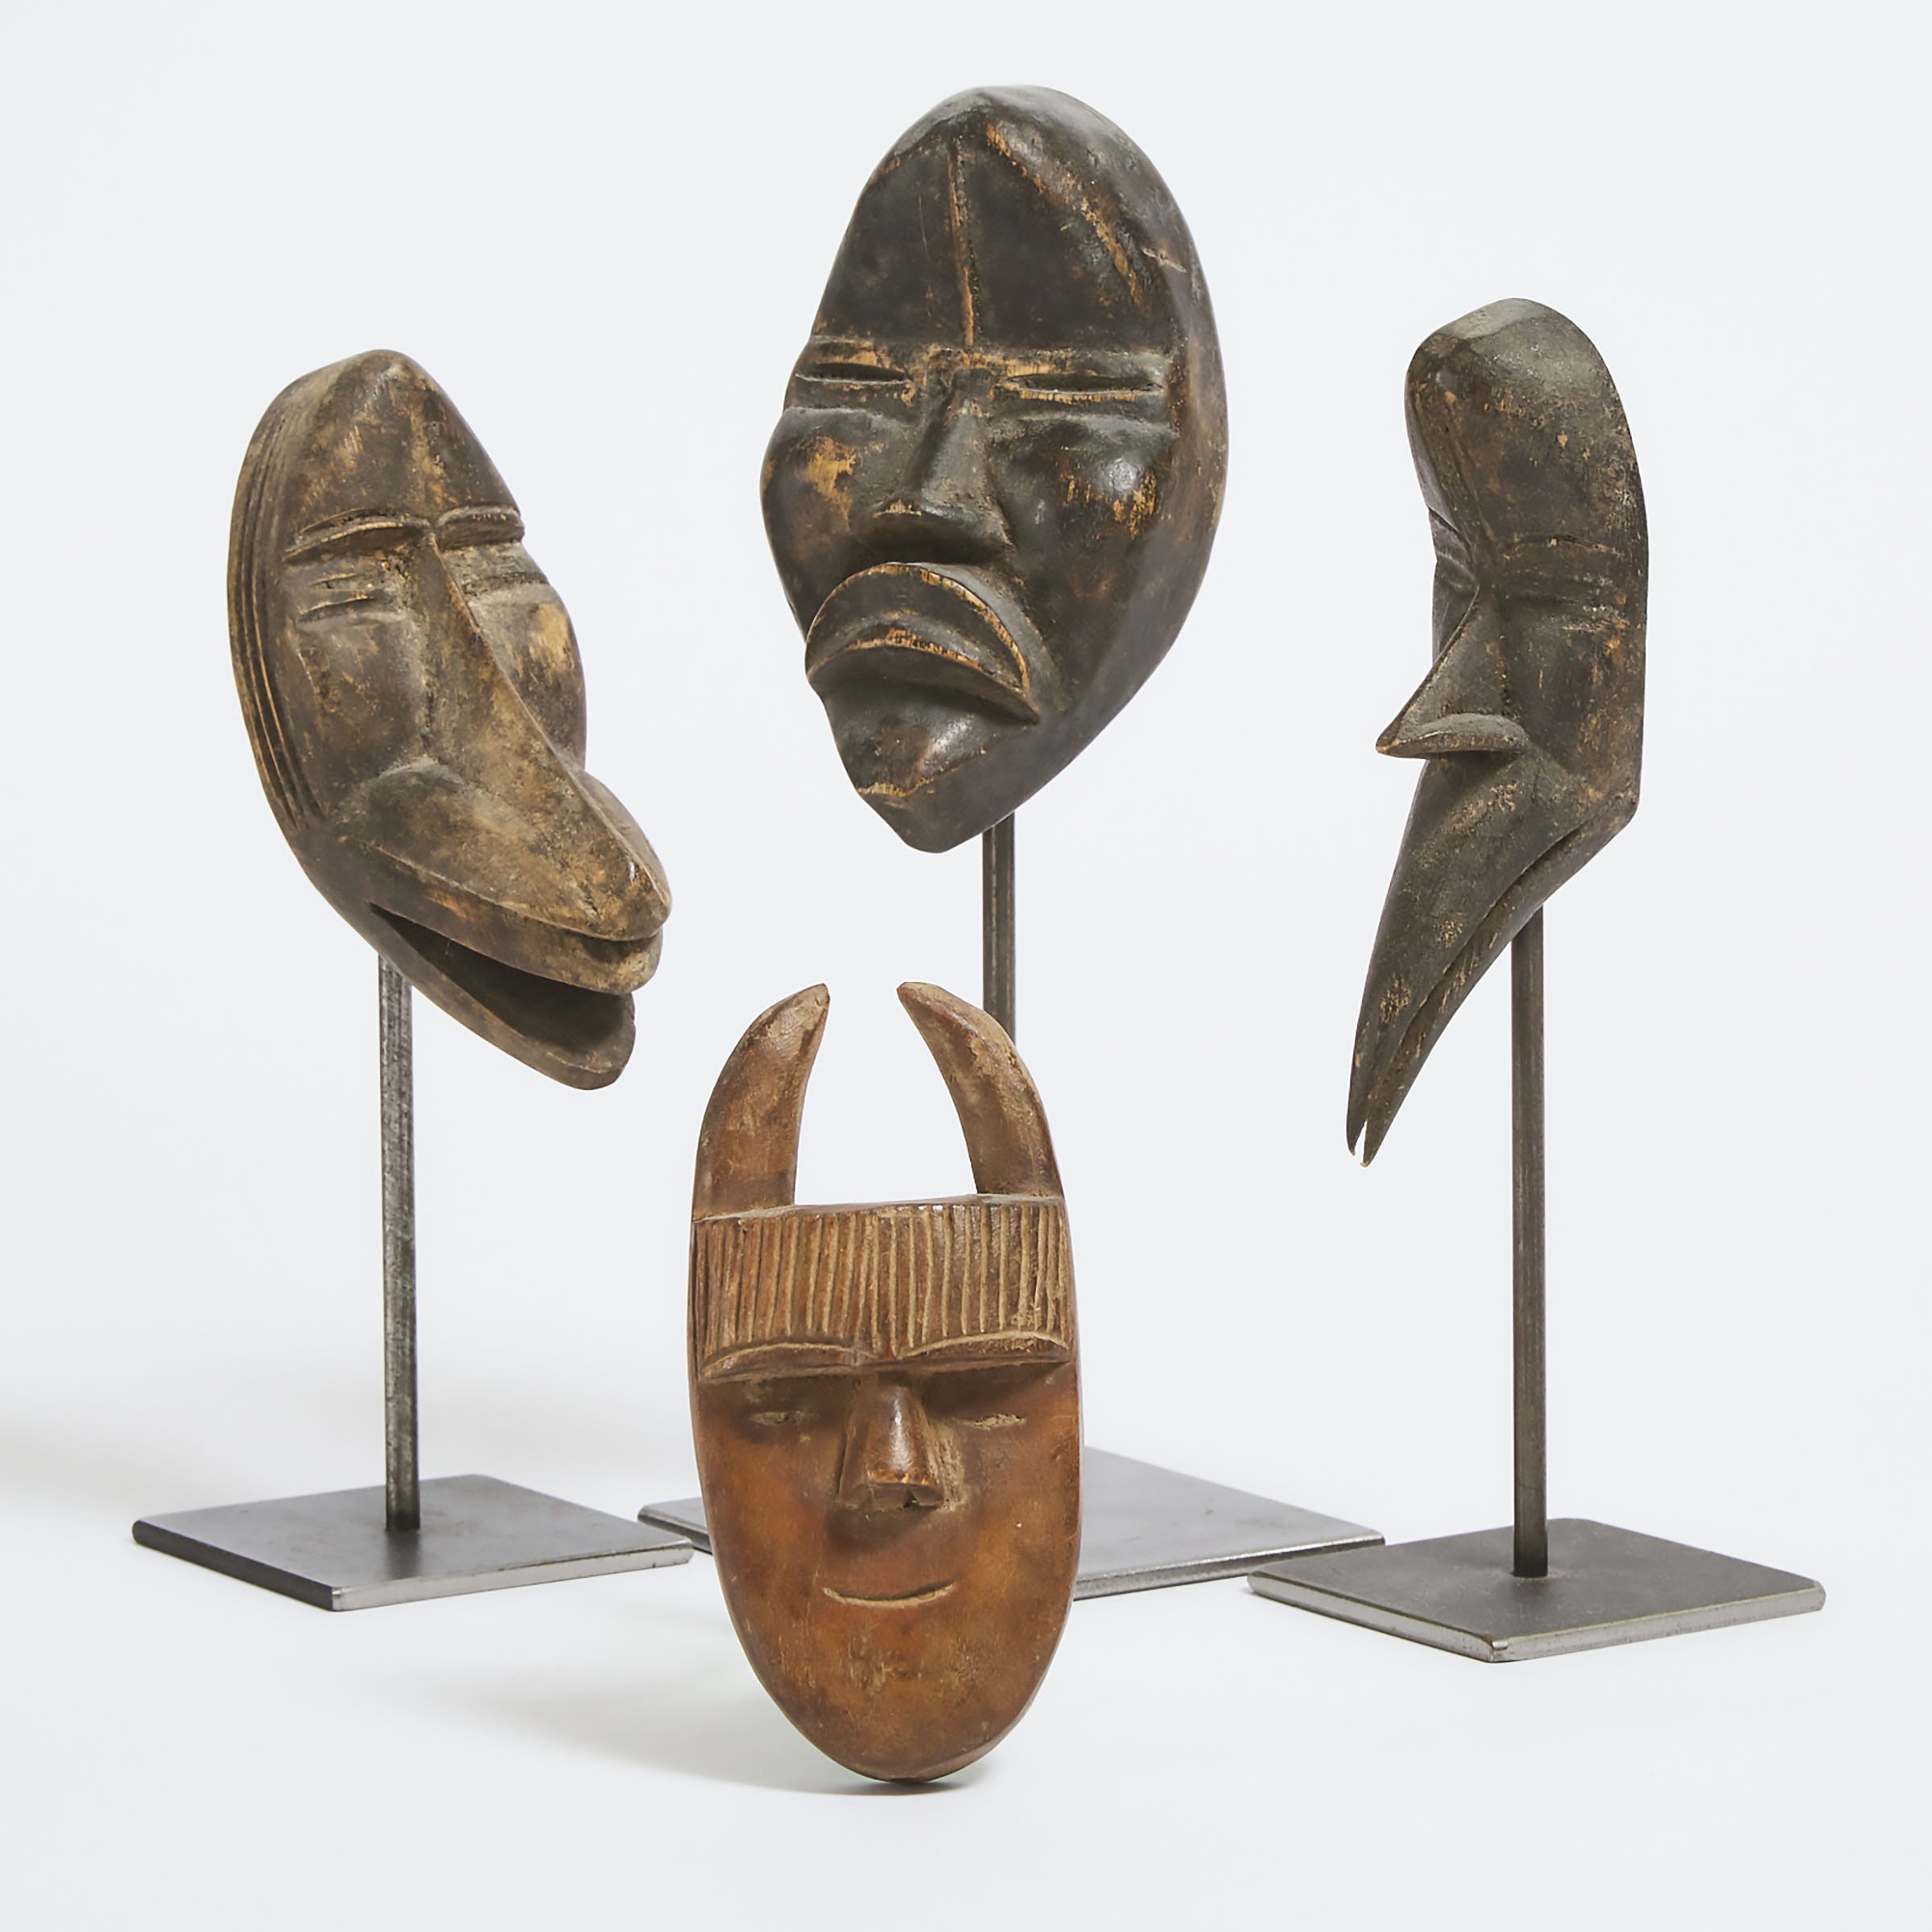 Three Dan Passport Masks, Ivory Coast/Liberia, West Africa, early to mid 20th century together with a Toma Passport Mask, Guinea/Liberia, West Africa, mid to late 20th century